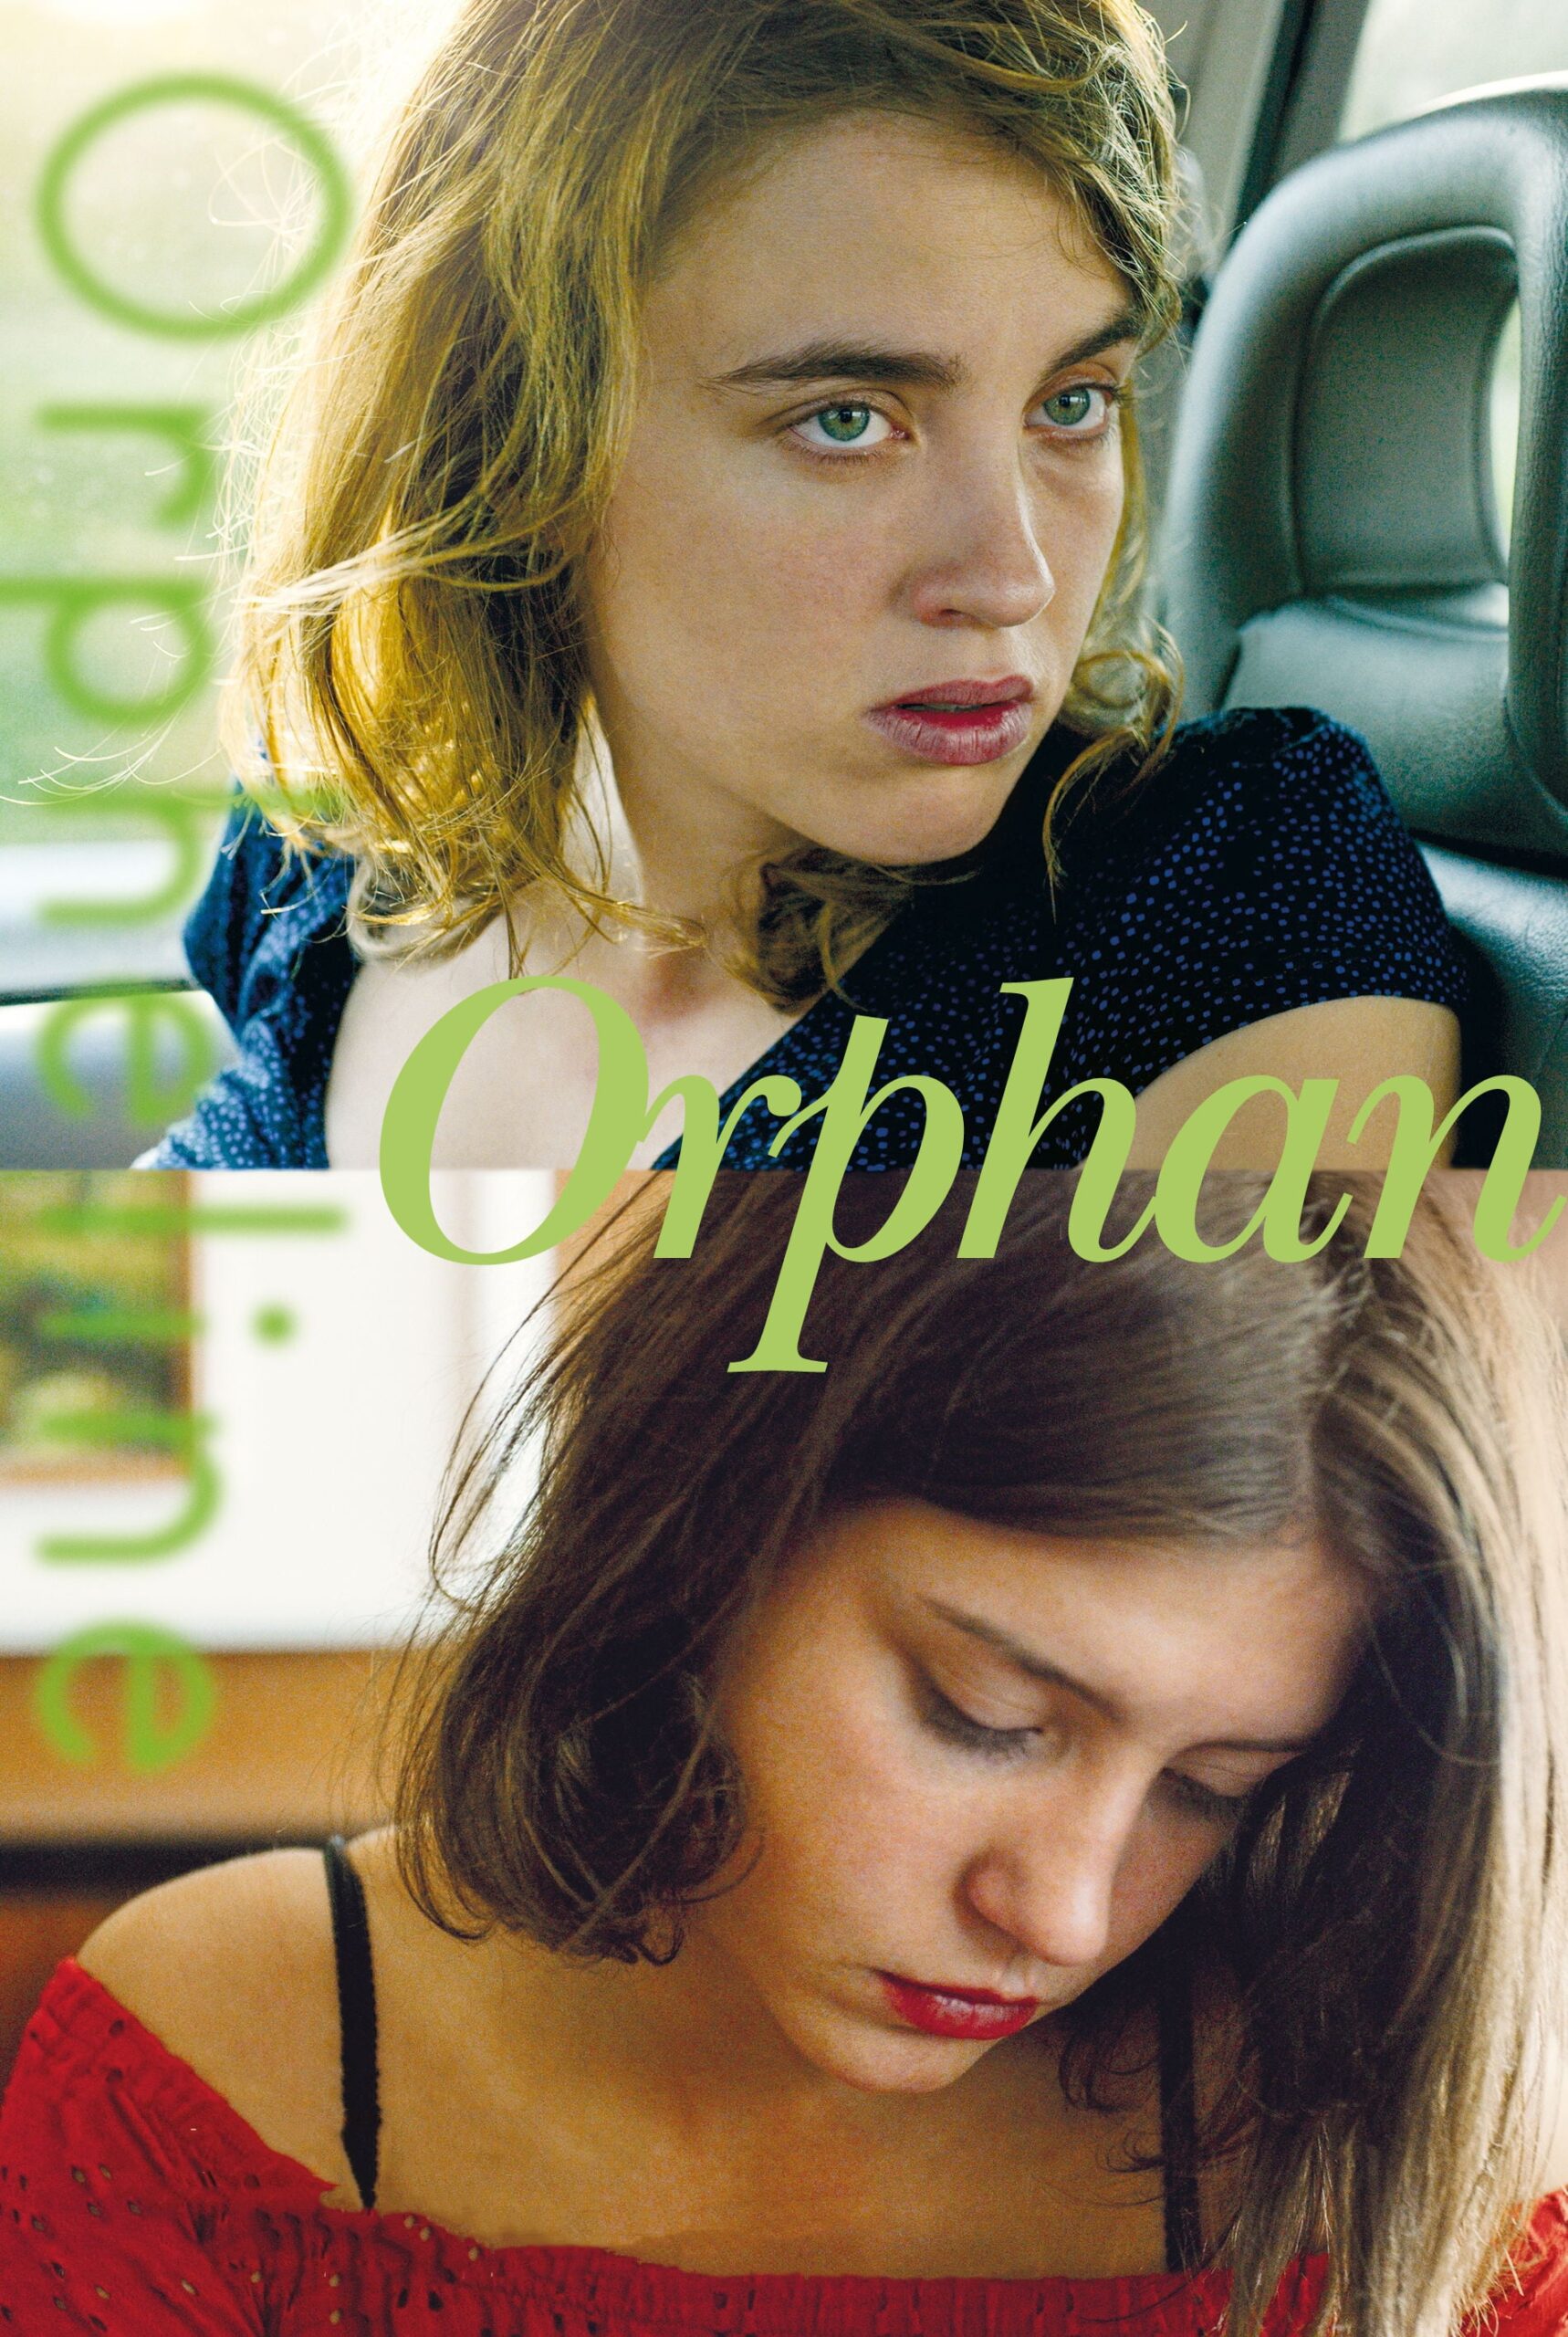 andy mountford share the orphan movie online photos